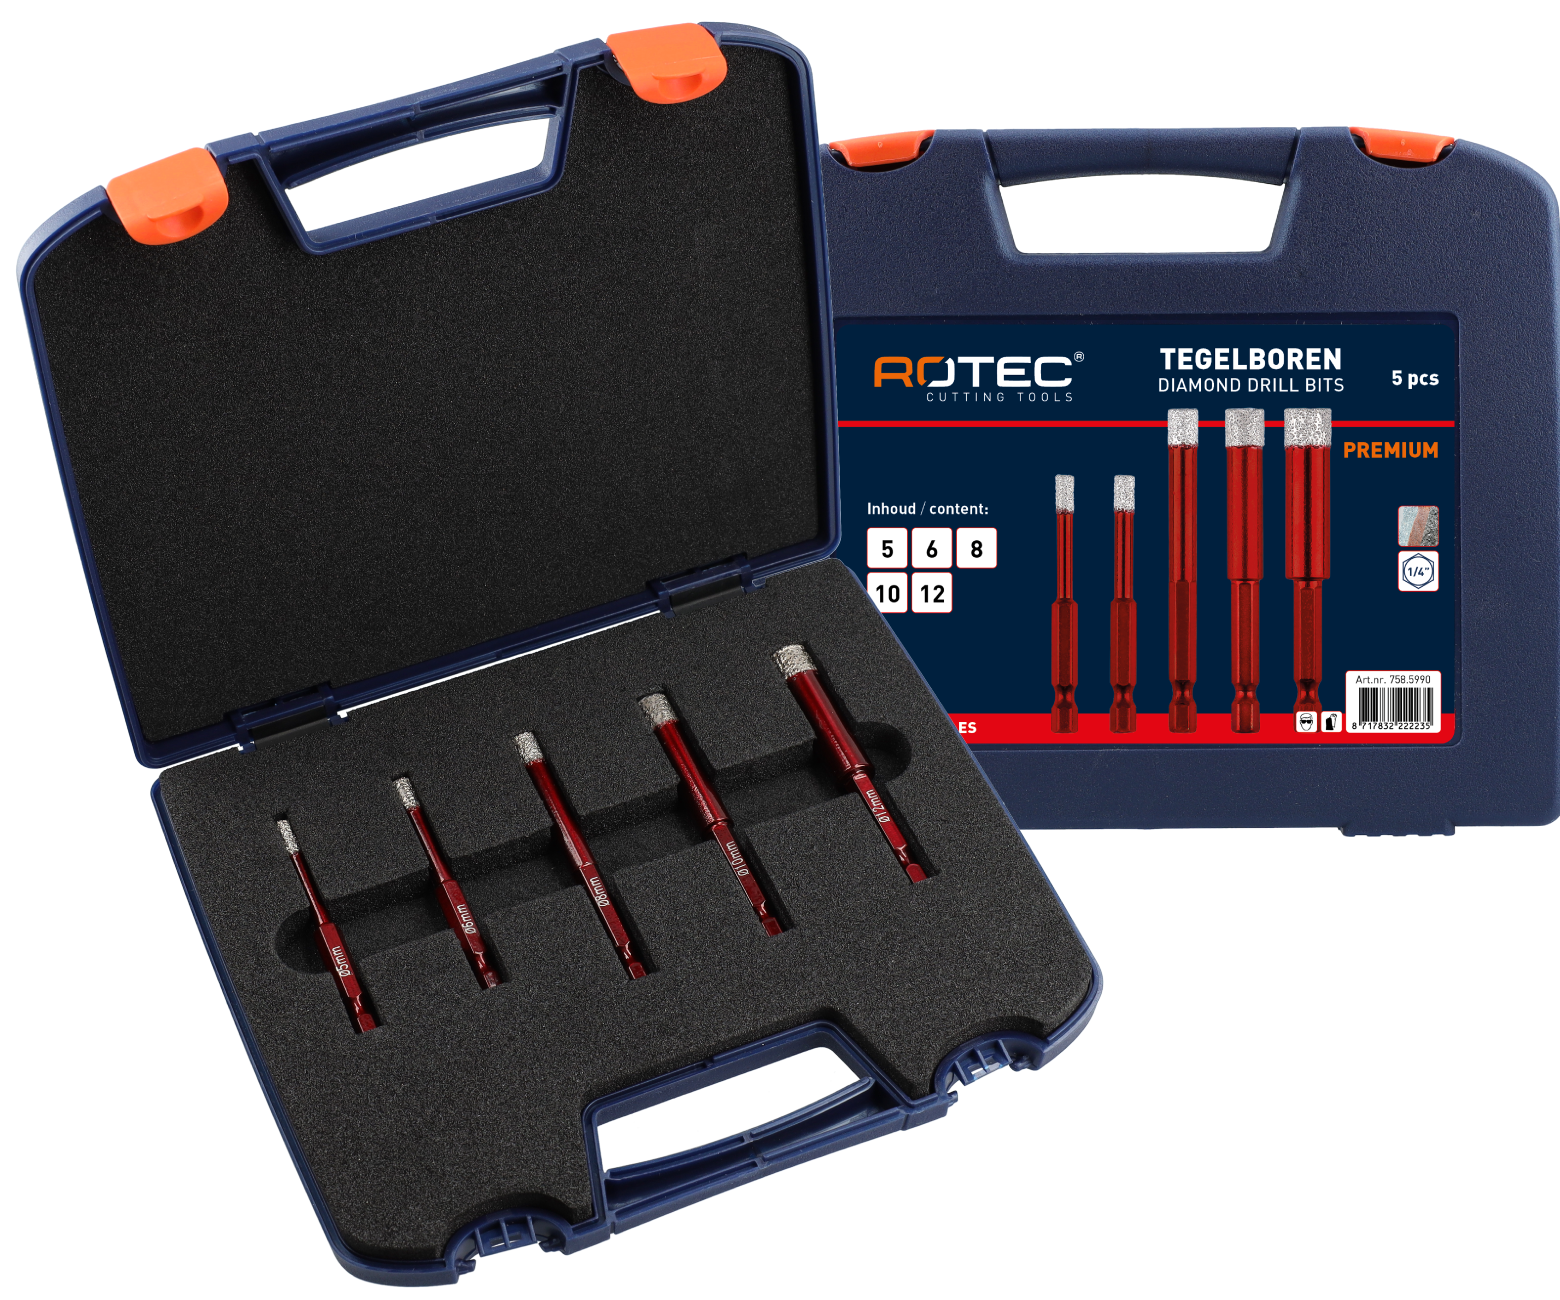 5 pc Tile drill bit set type '758', with wax, in plastic case